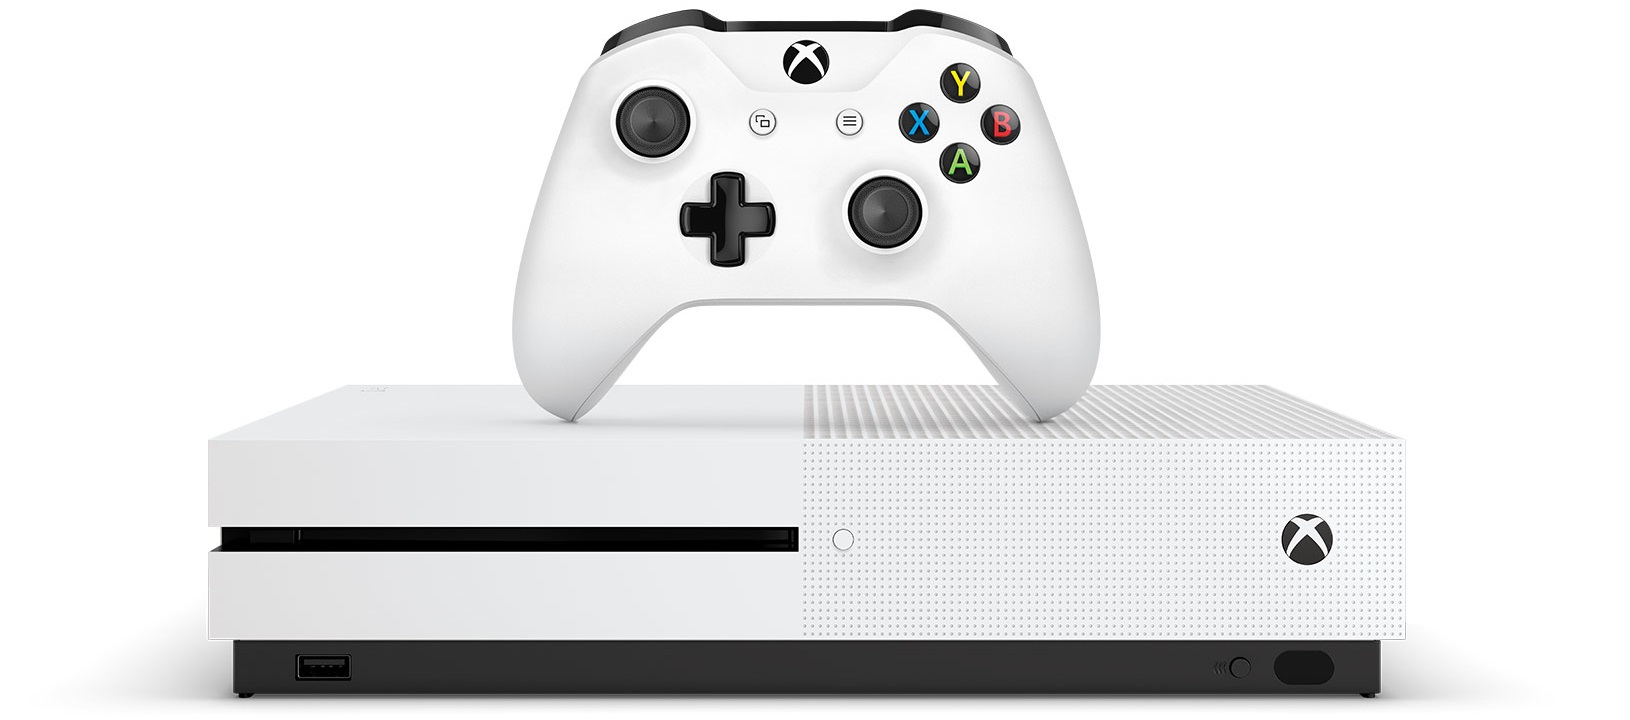 image of the Xbox One and controller